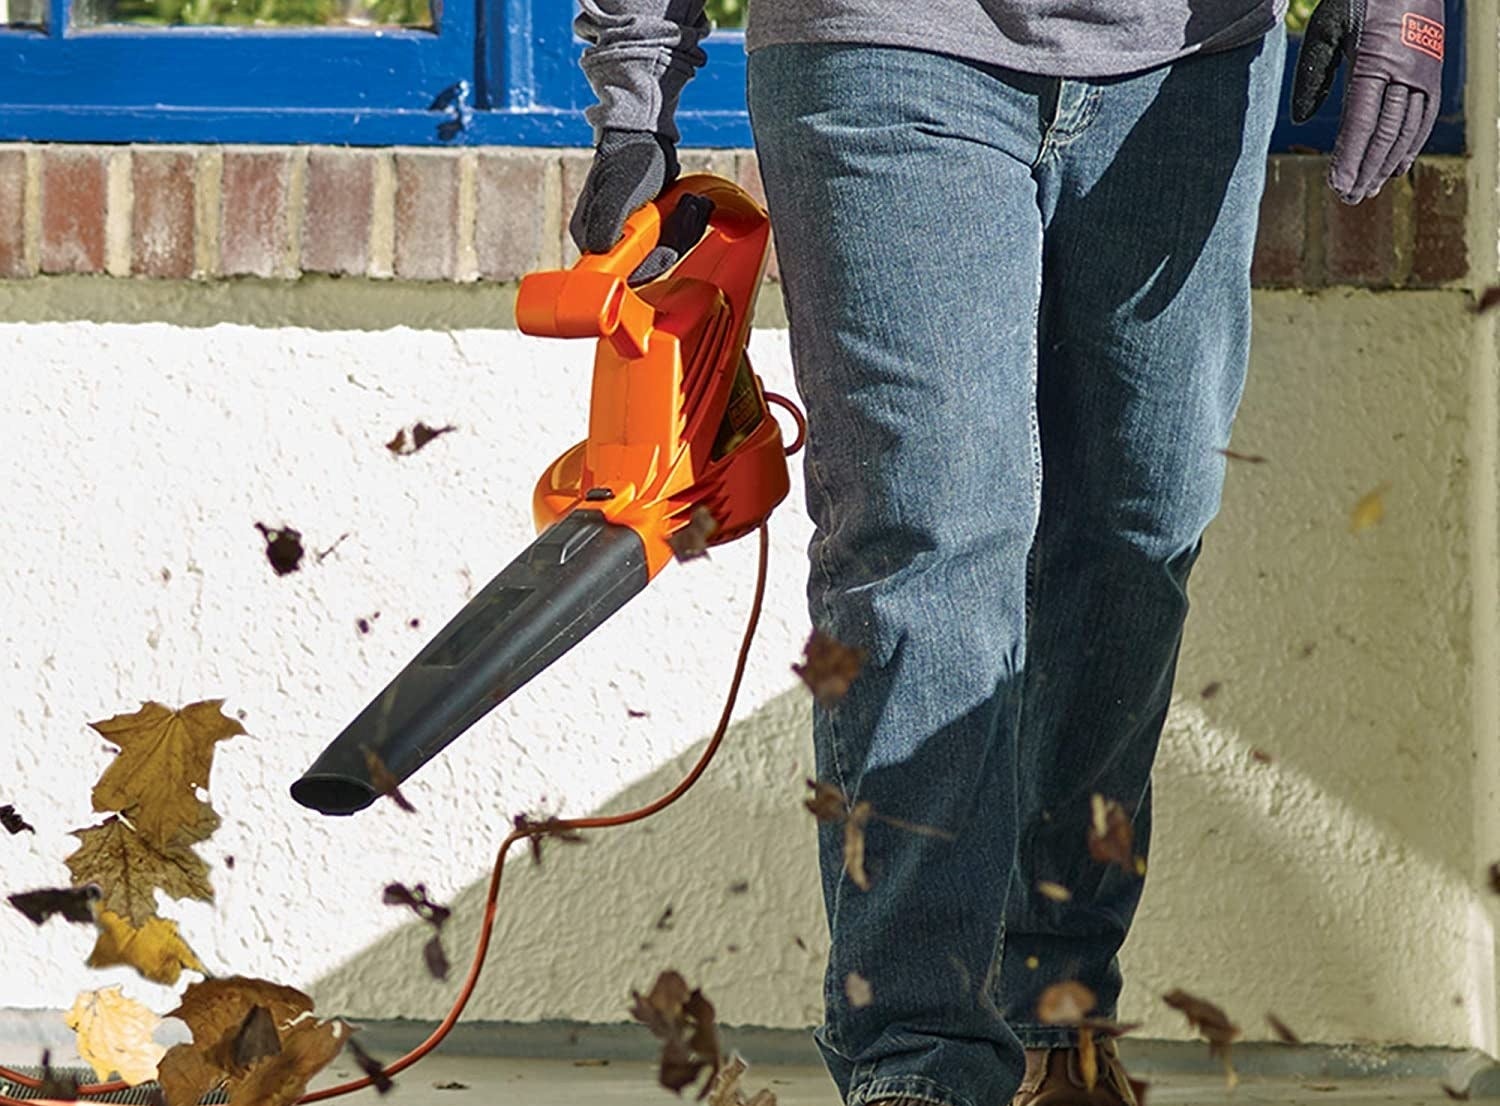 a model holding the leaf blower with an orange handle